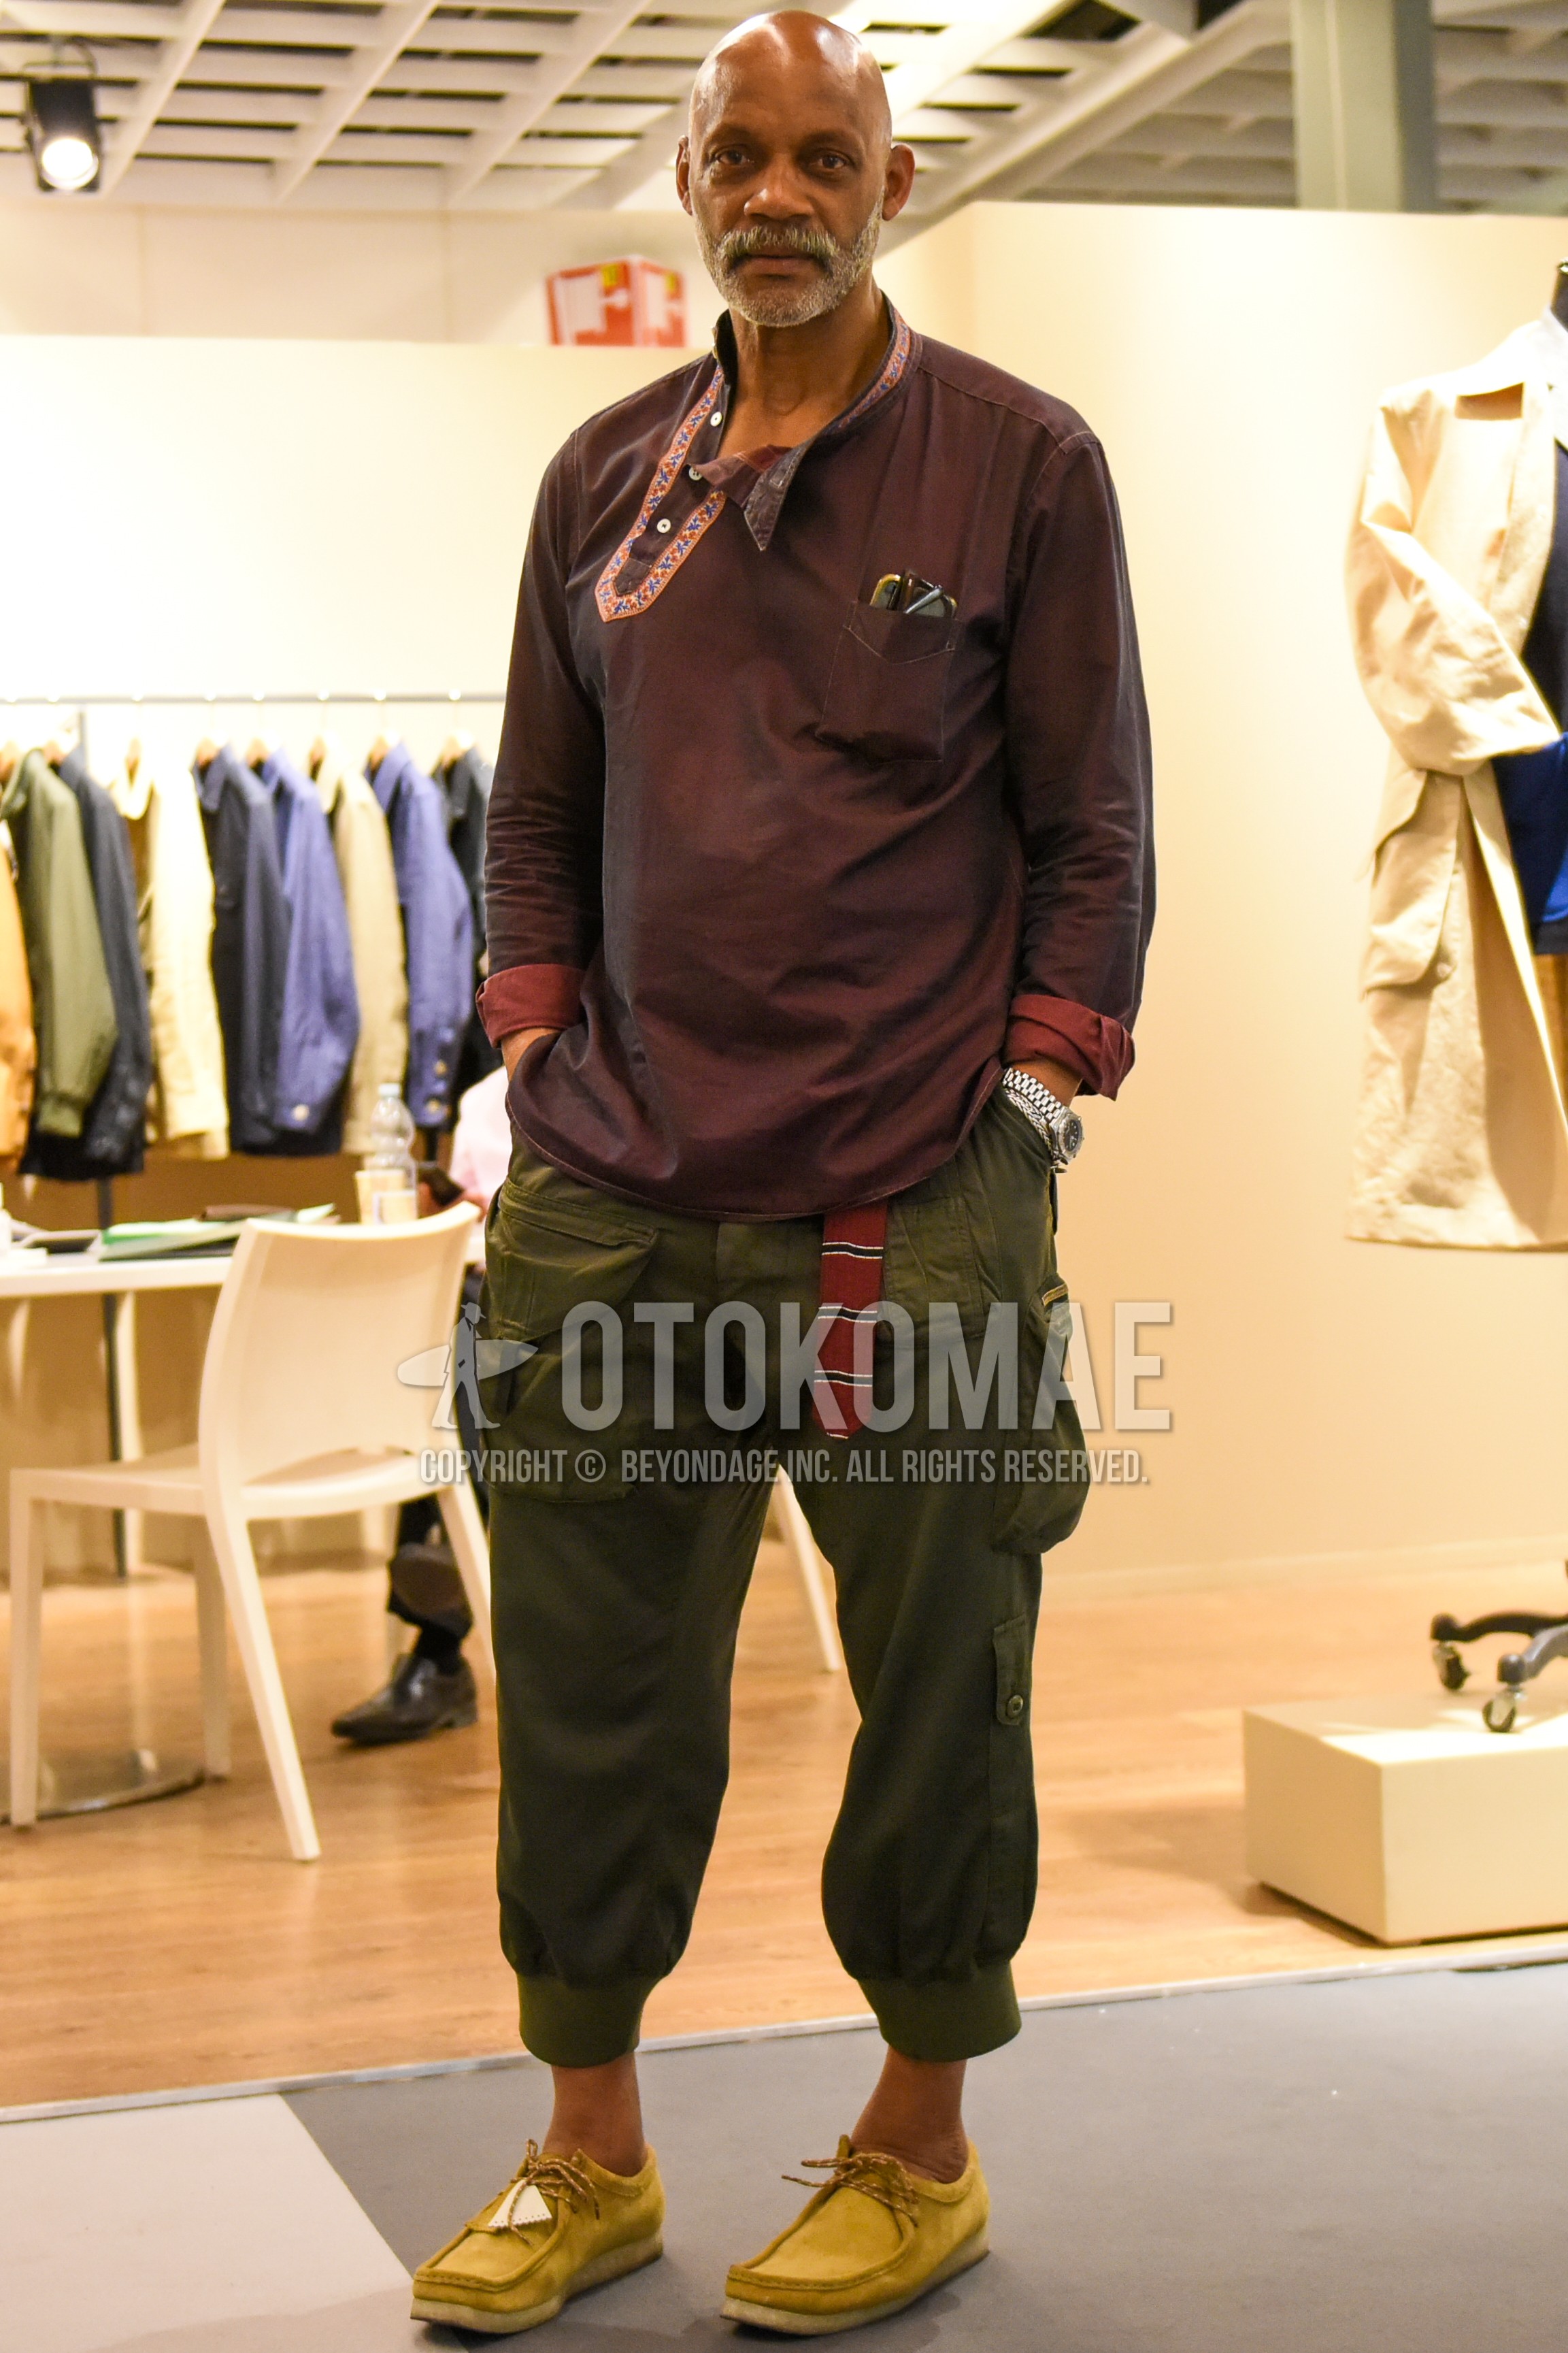 Men's spring summer autumn outfit with brown plain shirt, red horizontal stripes tape belt, olive green plain cargo pants, yellow moccasins/deck shoes leather shoes.